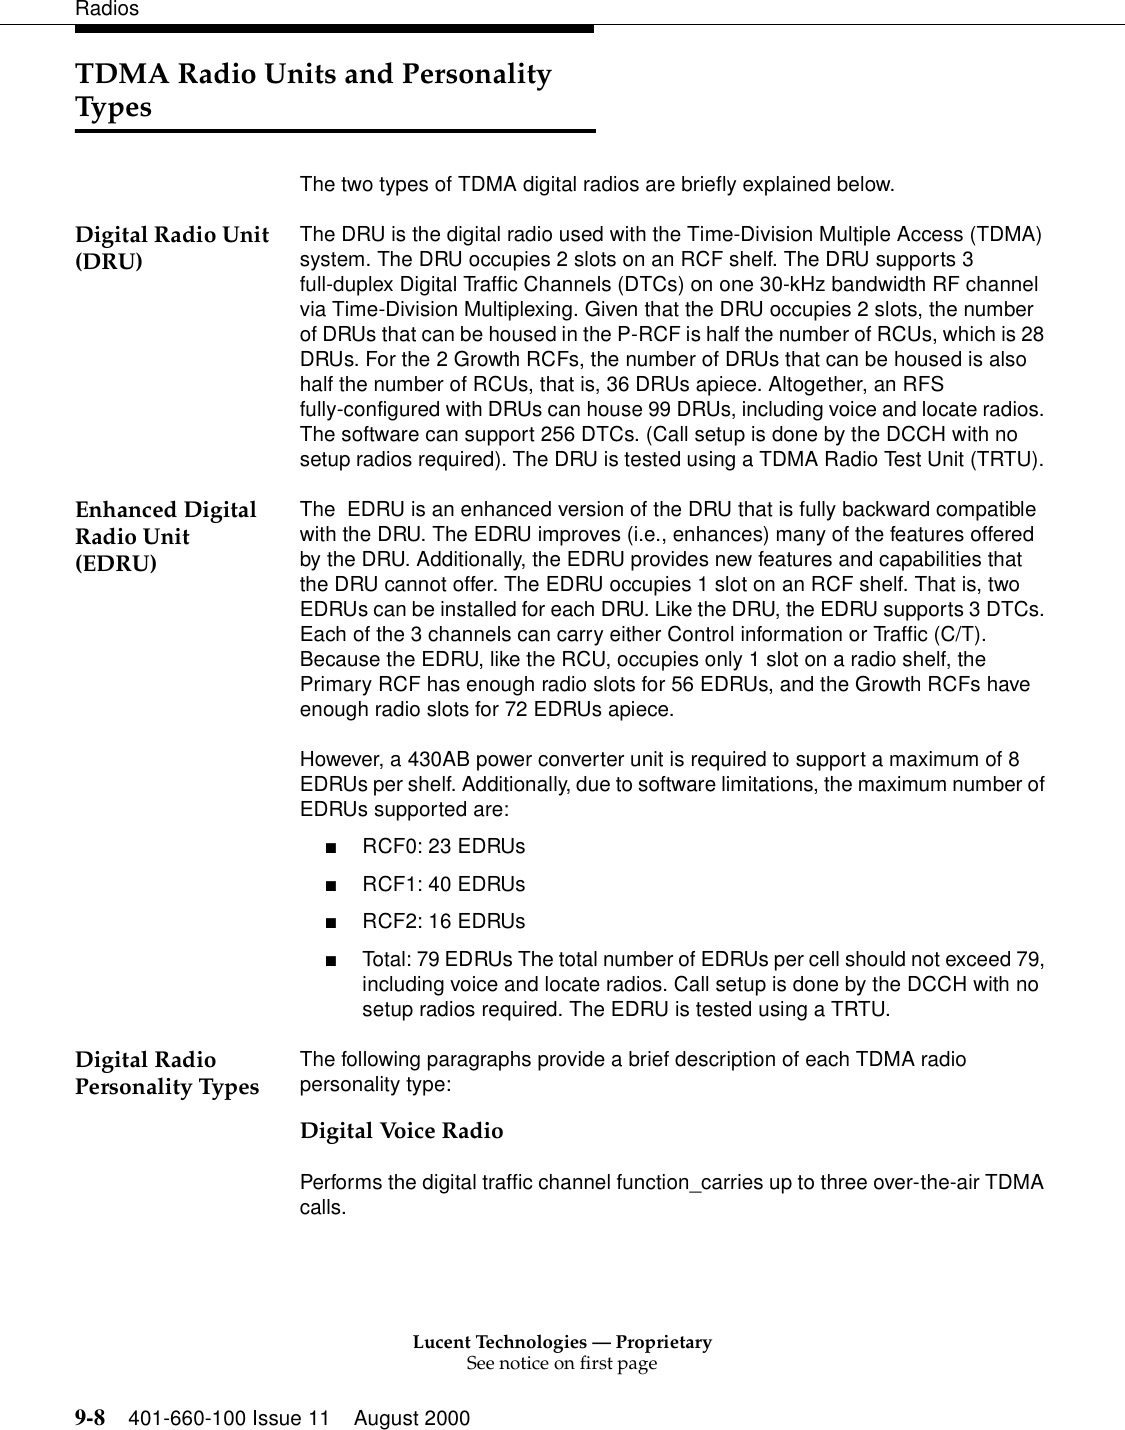 Lucent Technologies — ProprietarySee notice on first page9-8 401-660-100 Issue 11 August 2000RadiosTDMA Radio Units and Personality TypesThe two types of TDMA digital radios are briefly explained below. Digital Radio Unit (DRU) The DRU is the digital radio used with the Time-Division Multiple Access (TDMA) system. The DRU occupies 2 slots on an RCF shelf. The DRU supports 3 full-duplex Digital Traffic Channels (DTCs) on one 30-kHz bandwidth RF channel via Time-Division Multiplexing. Given that the DRU occupies 2 slots, the number of DRUs that can be housed in the P-RCF is half the number of RCUs, which is 28 DRUs. For the 2 Growth RCFs, the number of DRUs that can be housed is also half the number of RCUs, that is, 36 DRUs apiece. Altogether, an RFS fully-configured with DRUs can house 99 DRUs, including voice and locate radios. The software can support 256 DTCs. (Call setup is done by the DCCH with no setup radios required). The DRU is tested using a TDMA Radio Test Unit (TRTU). Enhanced Digital Radio Unit (EDRU)The  EDRU is an enhanced version of the DRU that is fully backward compatible with the DRU. The EDRU improves (i.e., enhances) many of the features offered by the DRU. Additionally, the EDRU provides new features and capabilities that the DRU cannot offer. The EDRU occupies 1 slot on an RCF shelf. That is, two EDRUs can be installed for each DRU. Like the DRU, the EDRU supports 3 DTCs. Each of the 3 channels can carry either Control information or Traffic (C/T). Because the EDRU, like the RCU, occupies only 1 slot on a radio shelf, the Primary RCF has enough radio slots for 56 EDRUs, and the Growth RCFs have enough radio slots for 72 EDRUs apiece. However, a 430AB power converter unit is required to support a maximum of 8 EDRUs per shelf. Additionally, due to software limitations, the maximum number of EDRUs supported are: ■RCF0: 23 EDRUs ■RCF1: 40 EDRUs ■RCF2: 16 EDRUs ■Total: 79 EDRUs The total number of EDRUs per cell should not exceed 79, including voice and locate radios. Call setup is done by the DCCH with no setup radios required. The EDRU is tested using a TRTU. Digital Radio Personality Types The following paragraphs provide a brief description of each TDMA radio personality type: Digital Voice RadioPerforms the digital traffic channel function_carries up to three over-the-air TDMA calls. 